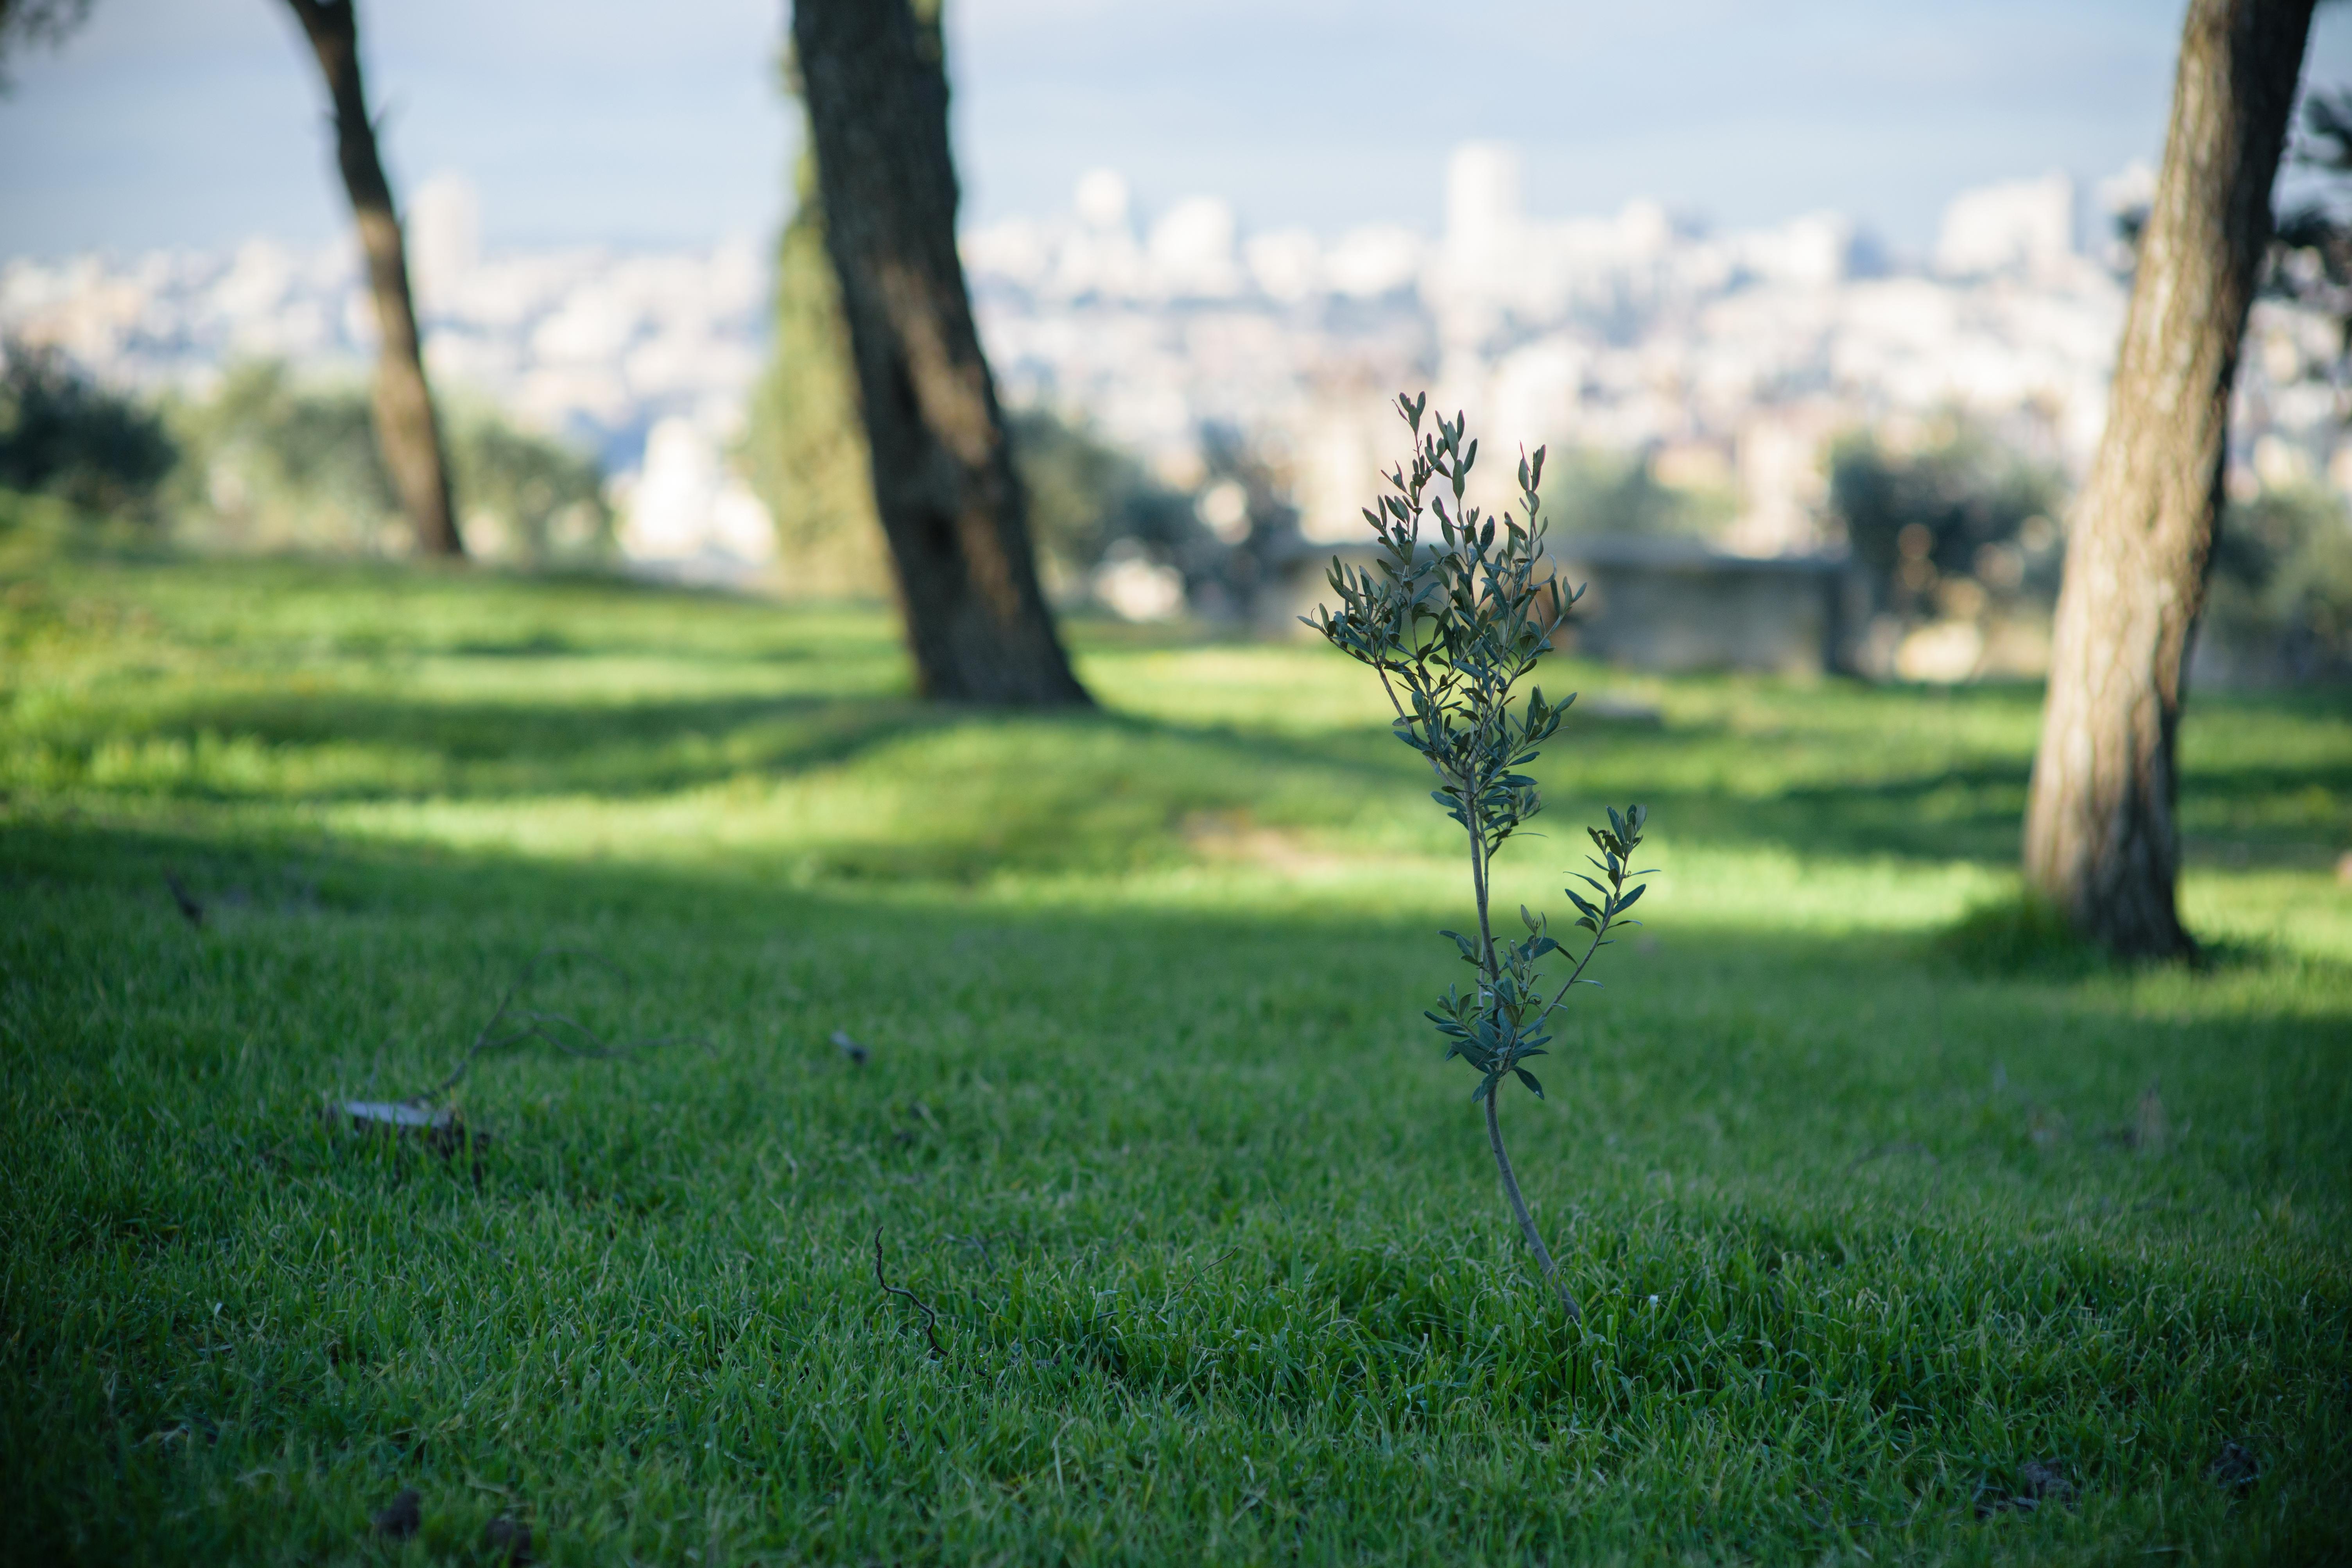 An olive tree in Jerusalem, symbolizing the hope for peace in the Middle East. Photo: LWF/M. Renaux